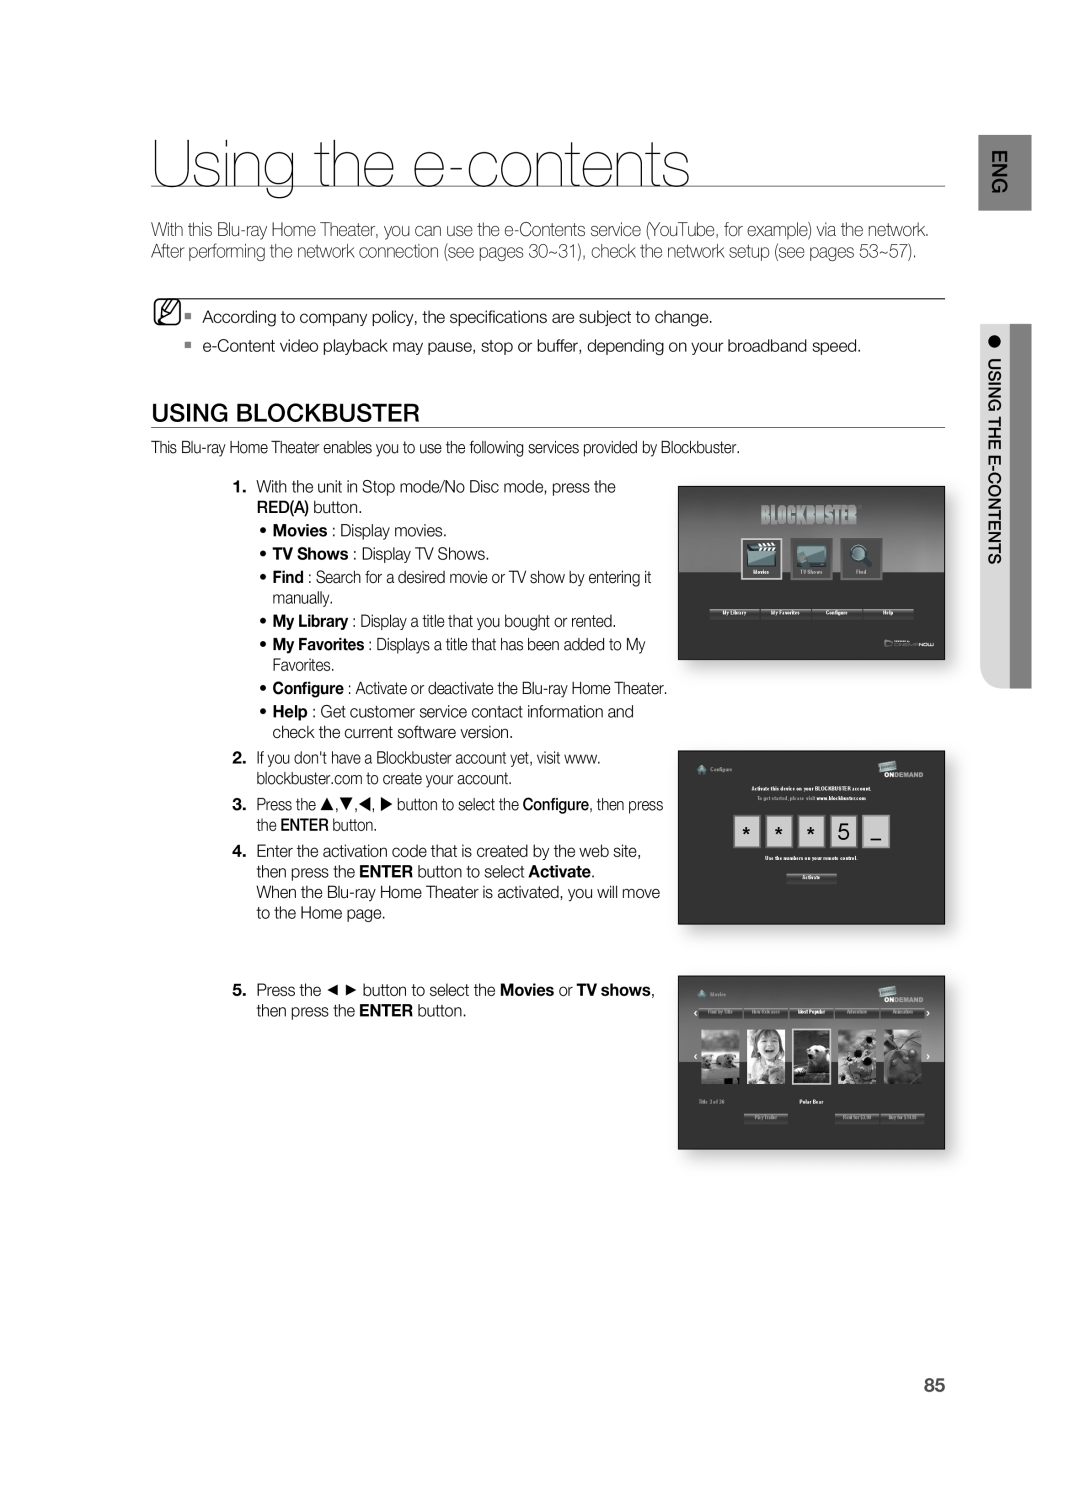 Samsung HT-BD3252 user manual Using the e-contents, Using Blockbuster, • TV Shows : Display TV Shows, manually 